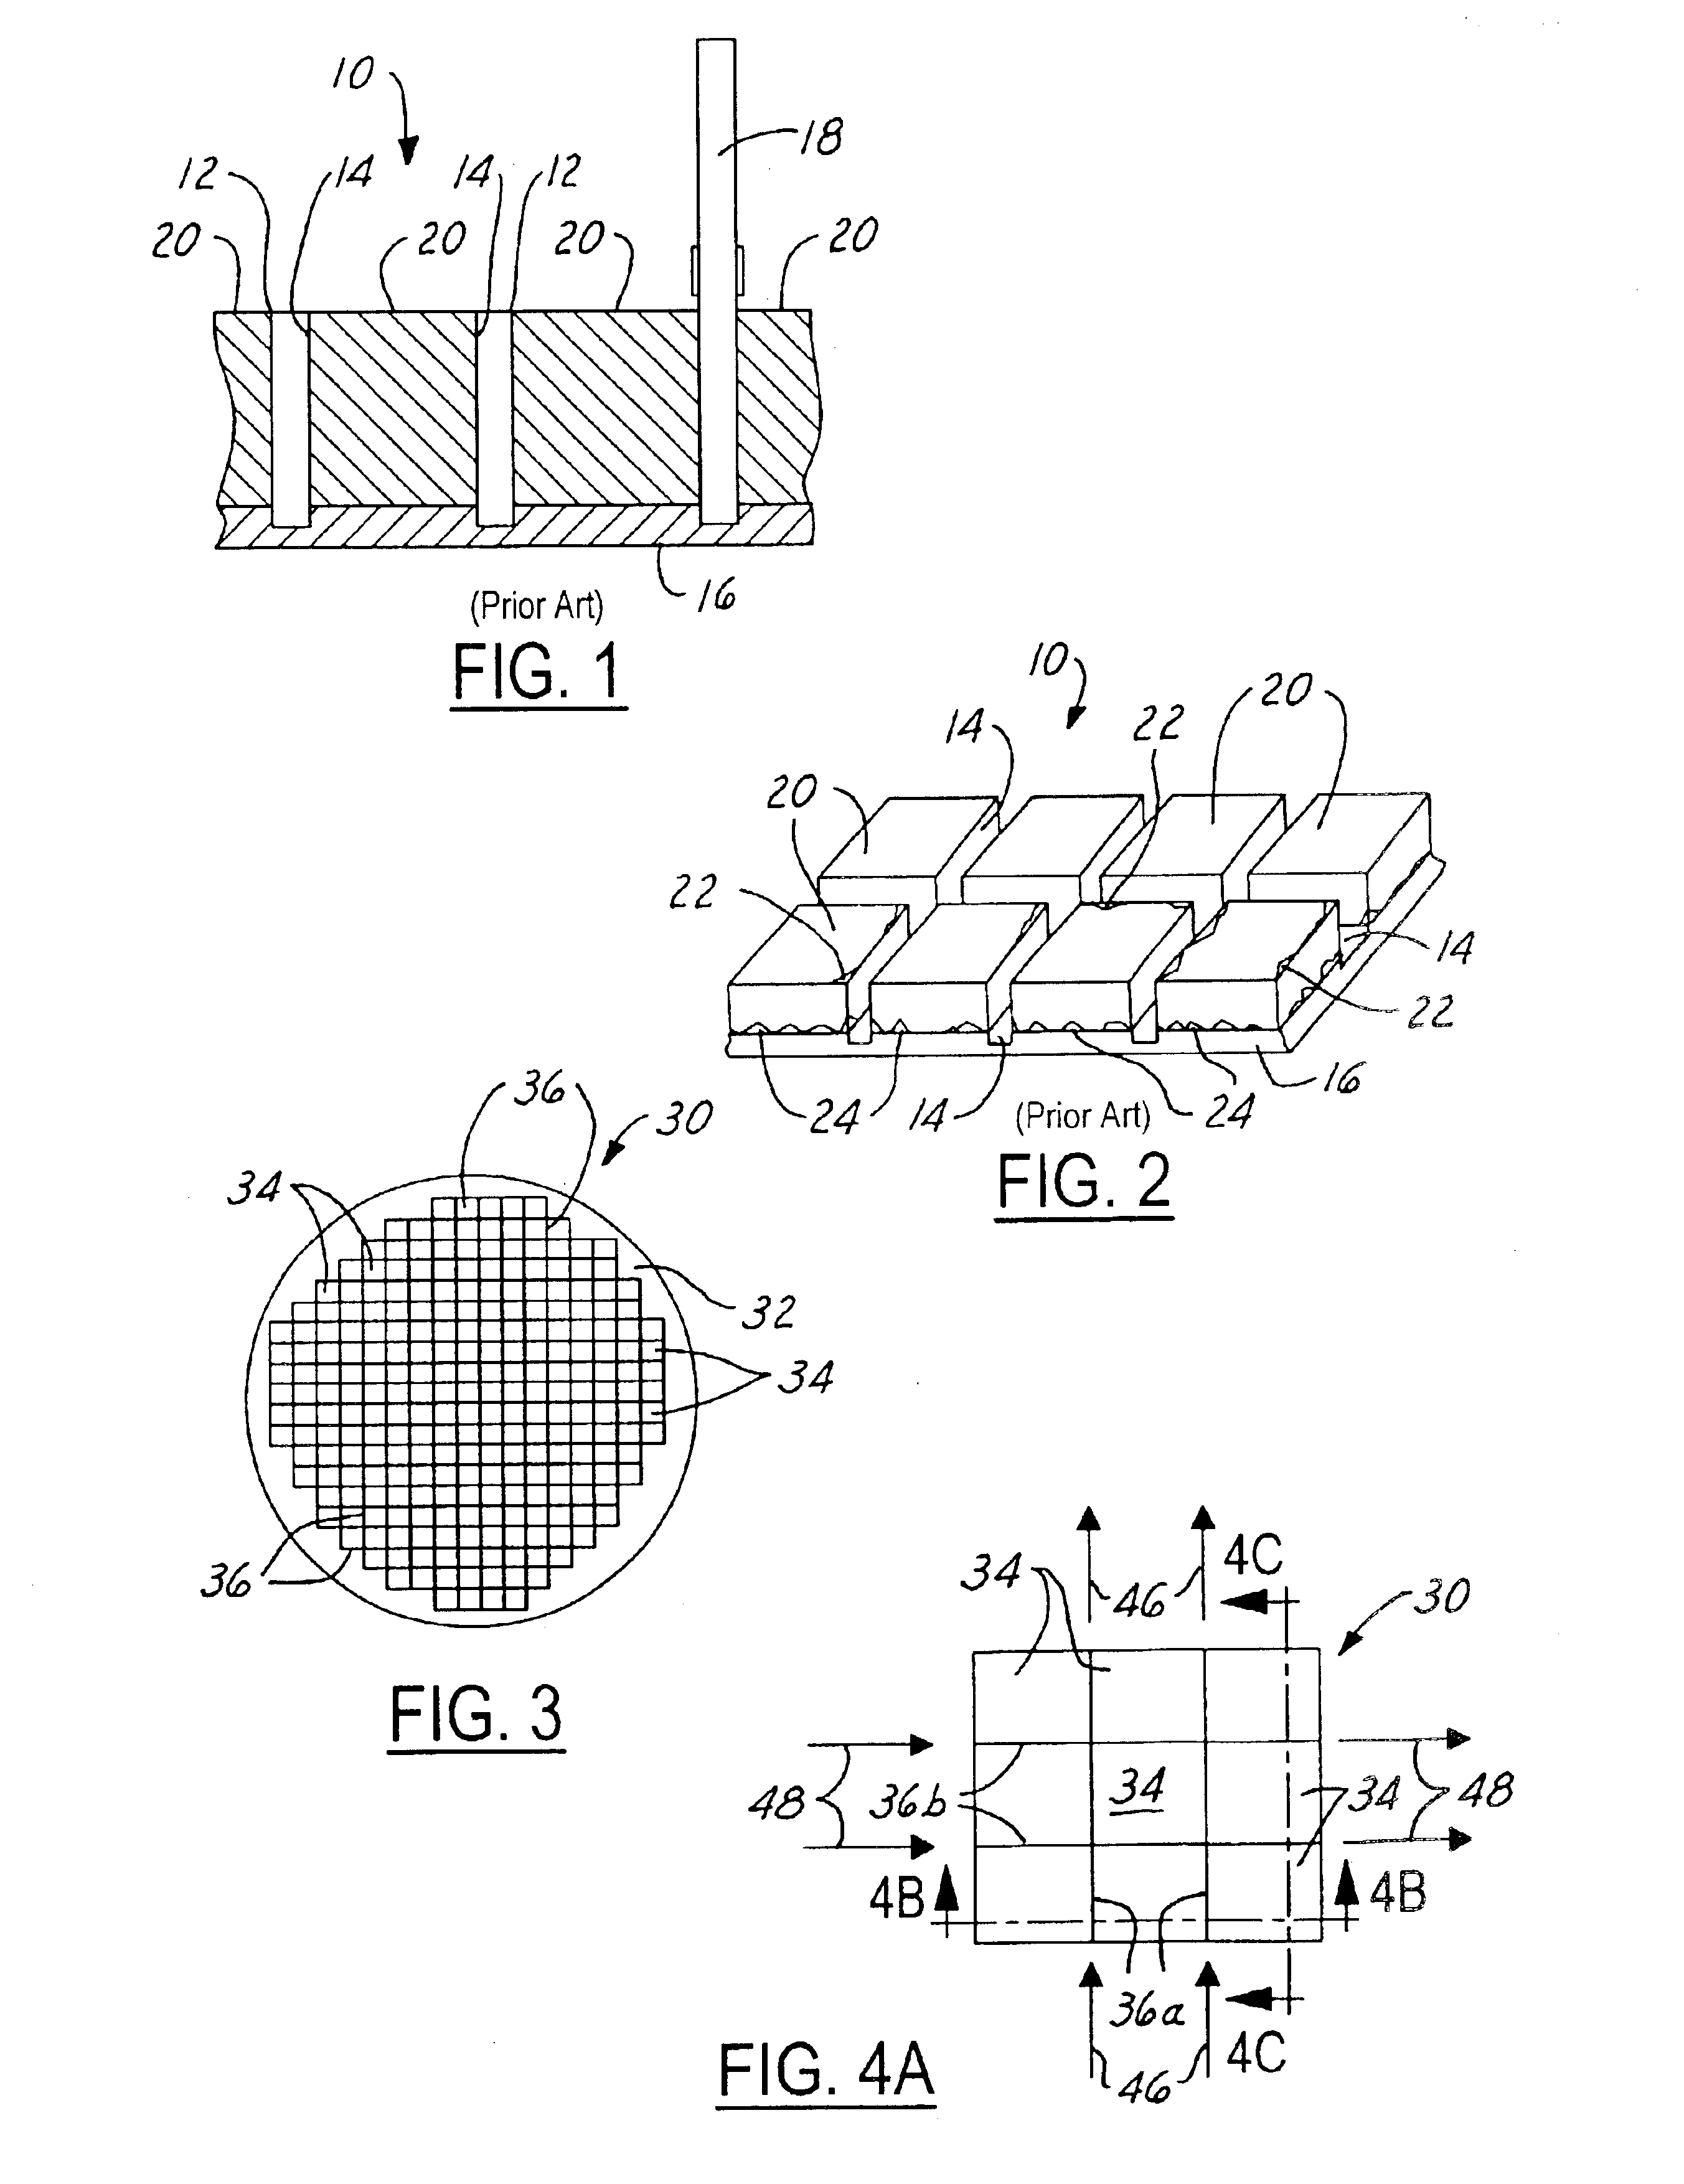 Process for separating dies on a wafer